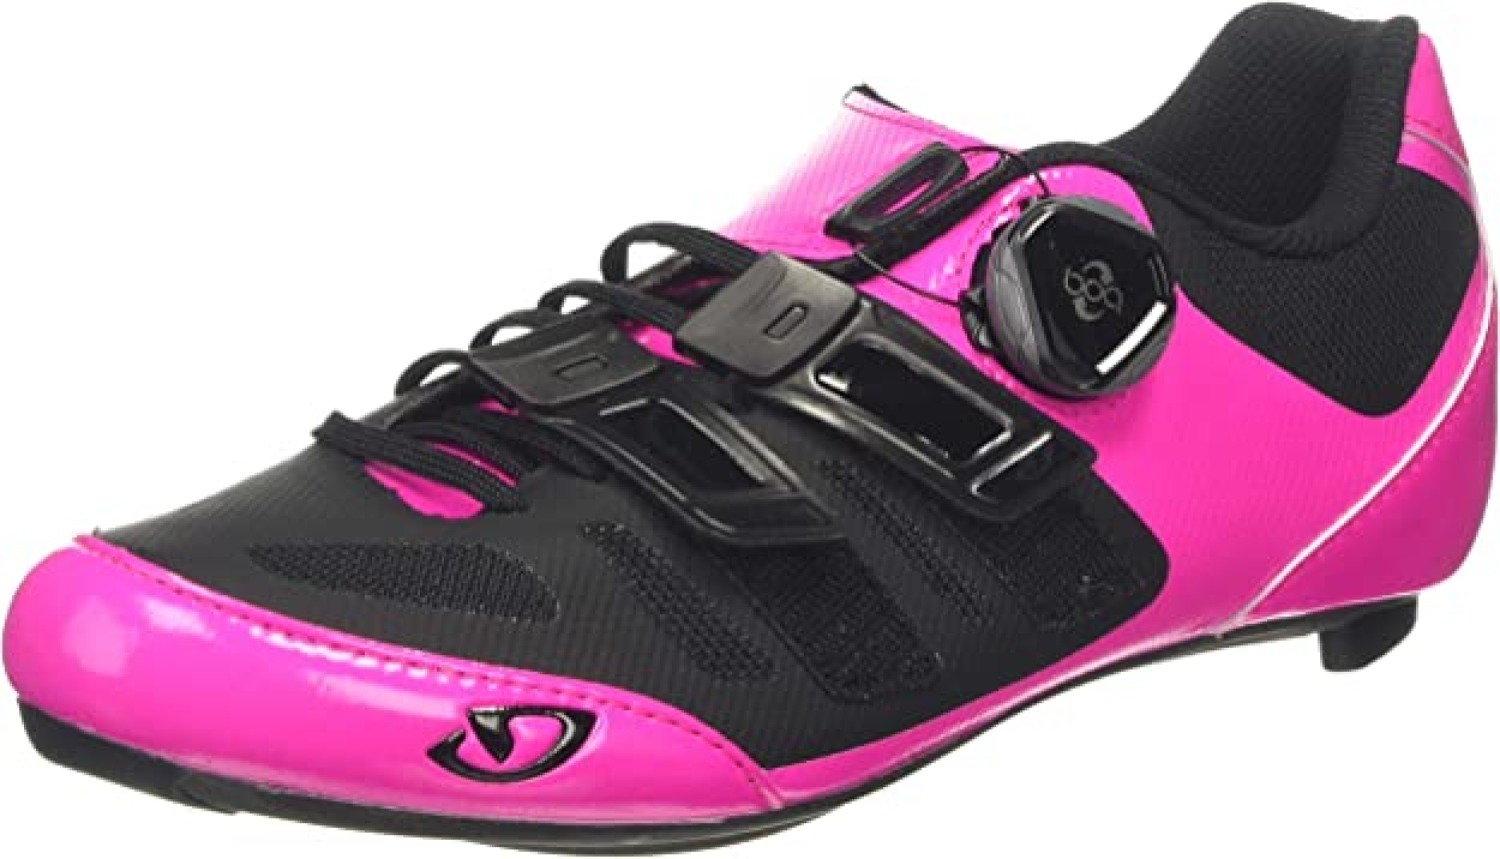 Giro Raes Techlace Womens Cycling Shoes (Bright Pink/Black) $29.99 + Free Shipping on $99+